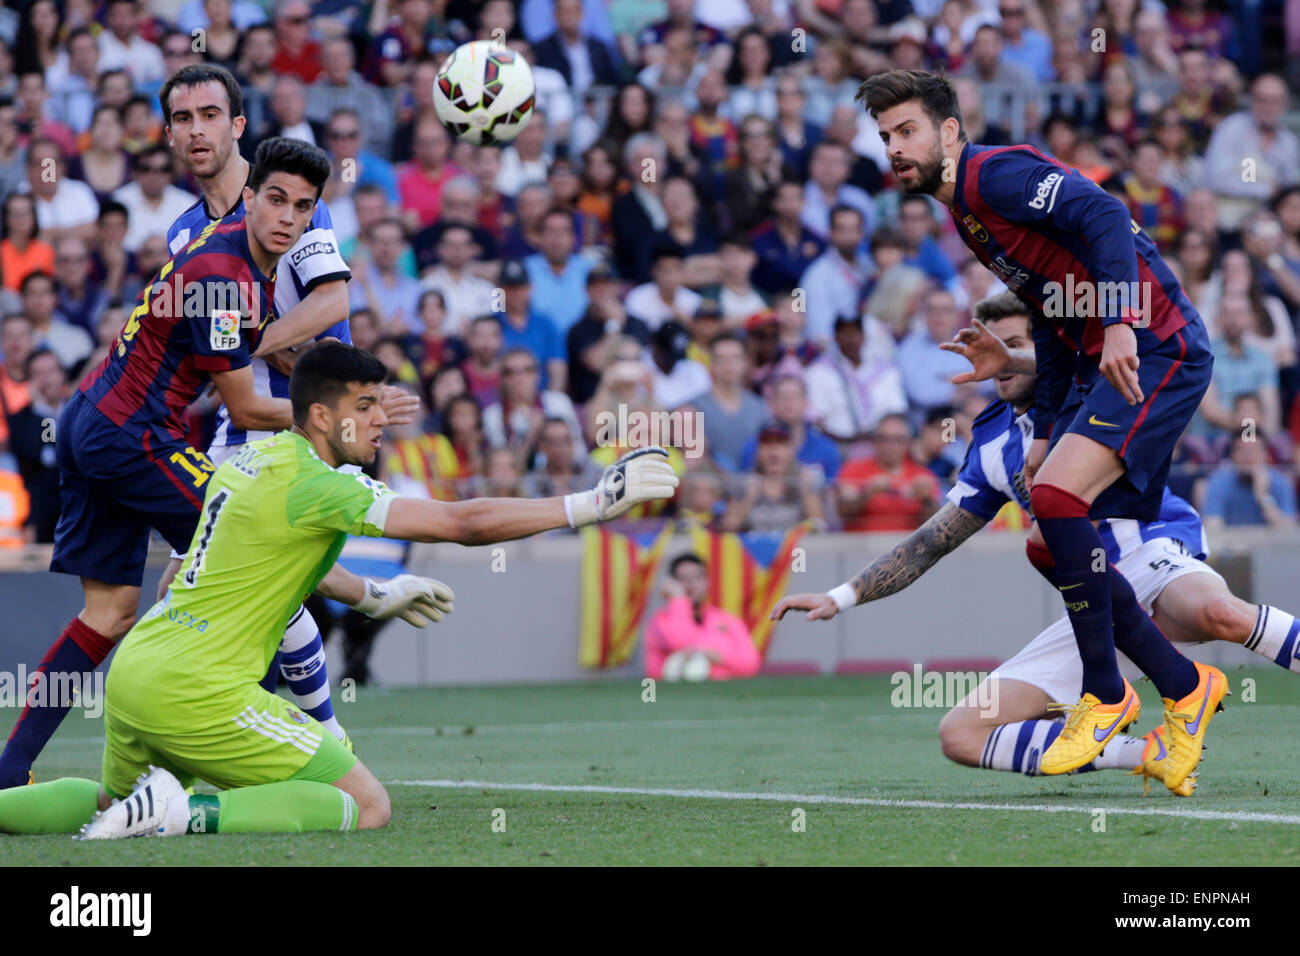 Barcelona, Spain. 9th May, 2015. FC Barcelona's Gerard Pique (front R) competes during the La Liga soccer match against Real Sociedad at Camp Nou Stadium in Barcelona, Spain, May 9, 2015. FC Barcelona won 2-0. Credit:  Pau Barrena/Xinhua/Alamy Live News Stock Photo